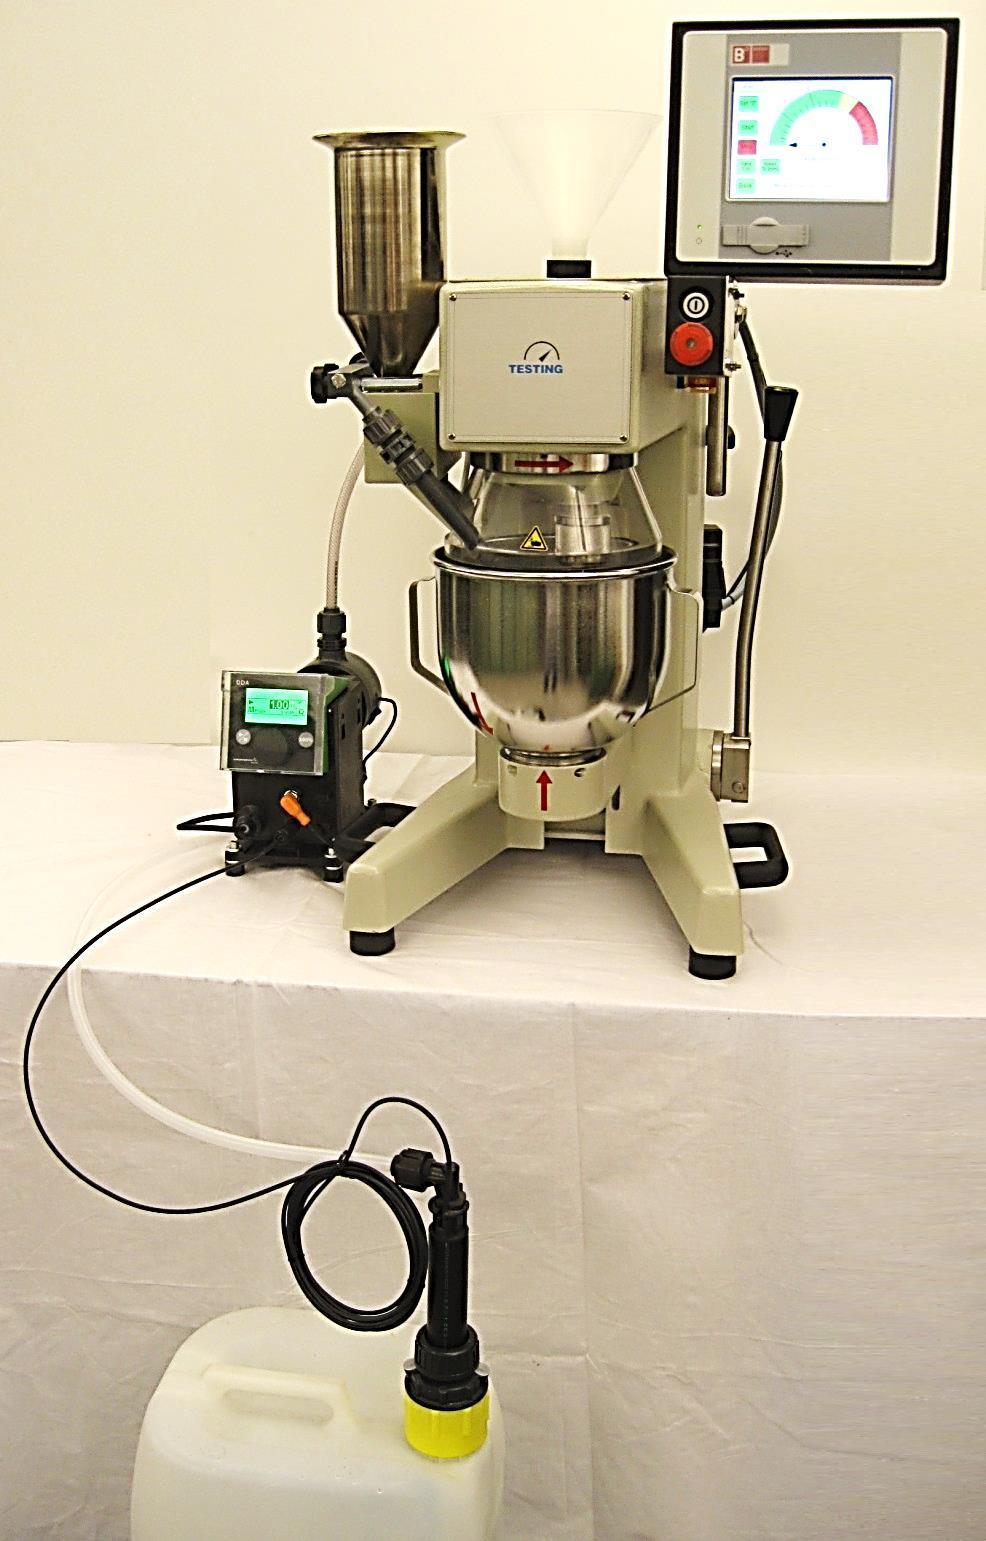 Laboratory Mortar Mixer (Testing) User Manual, Version February 22, 2015 3/16 1.3 Main Components The following picture shows the typical arrangement of the mixer with the water dosing unit.